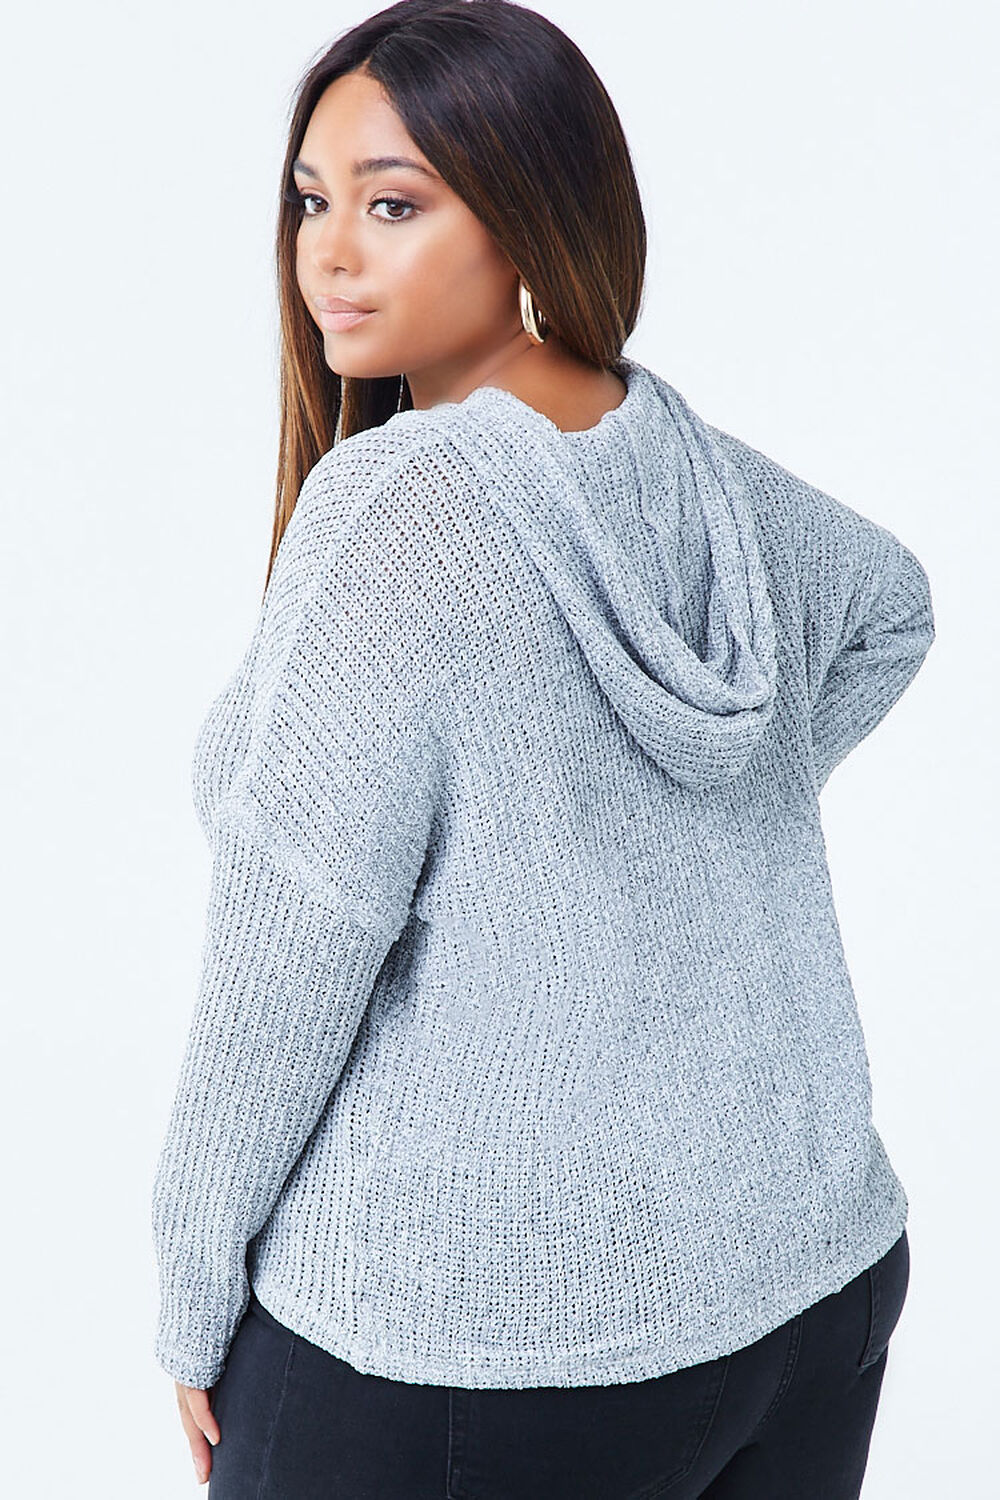 Plus Size Hooded Marled Top, image 2